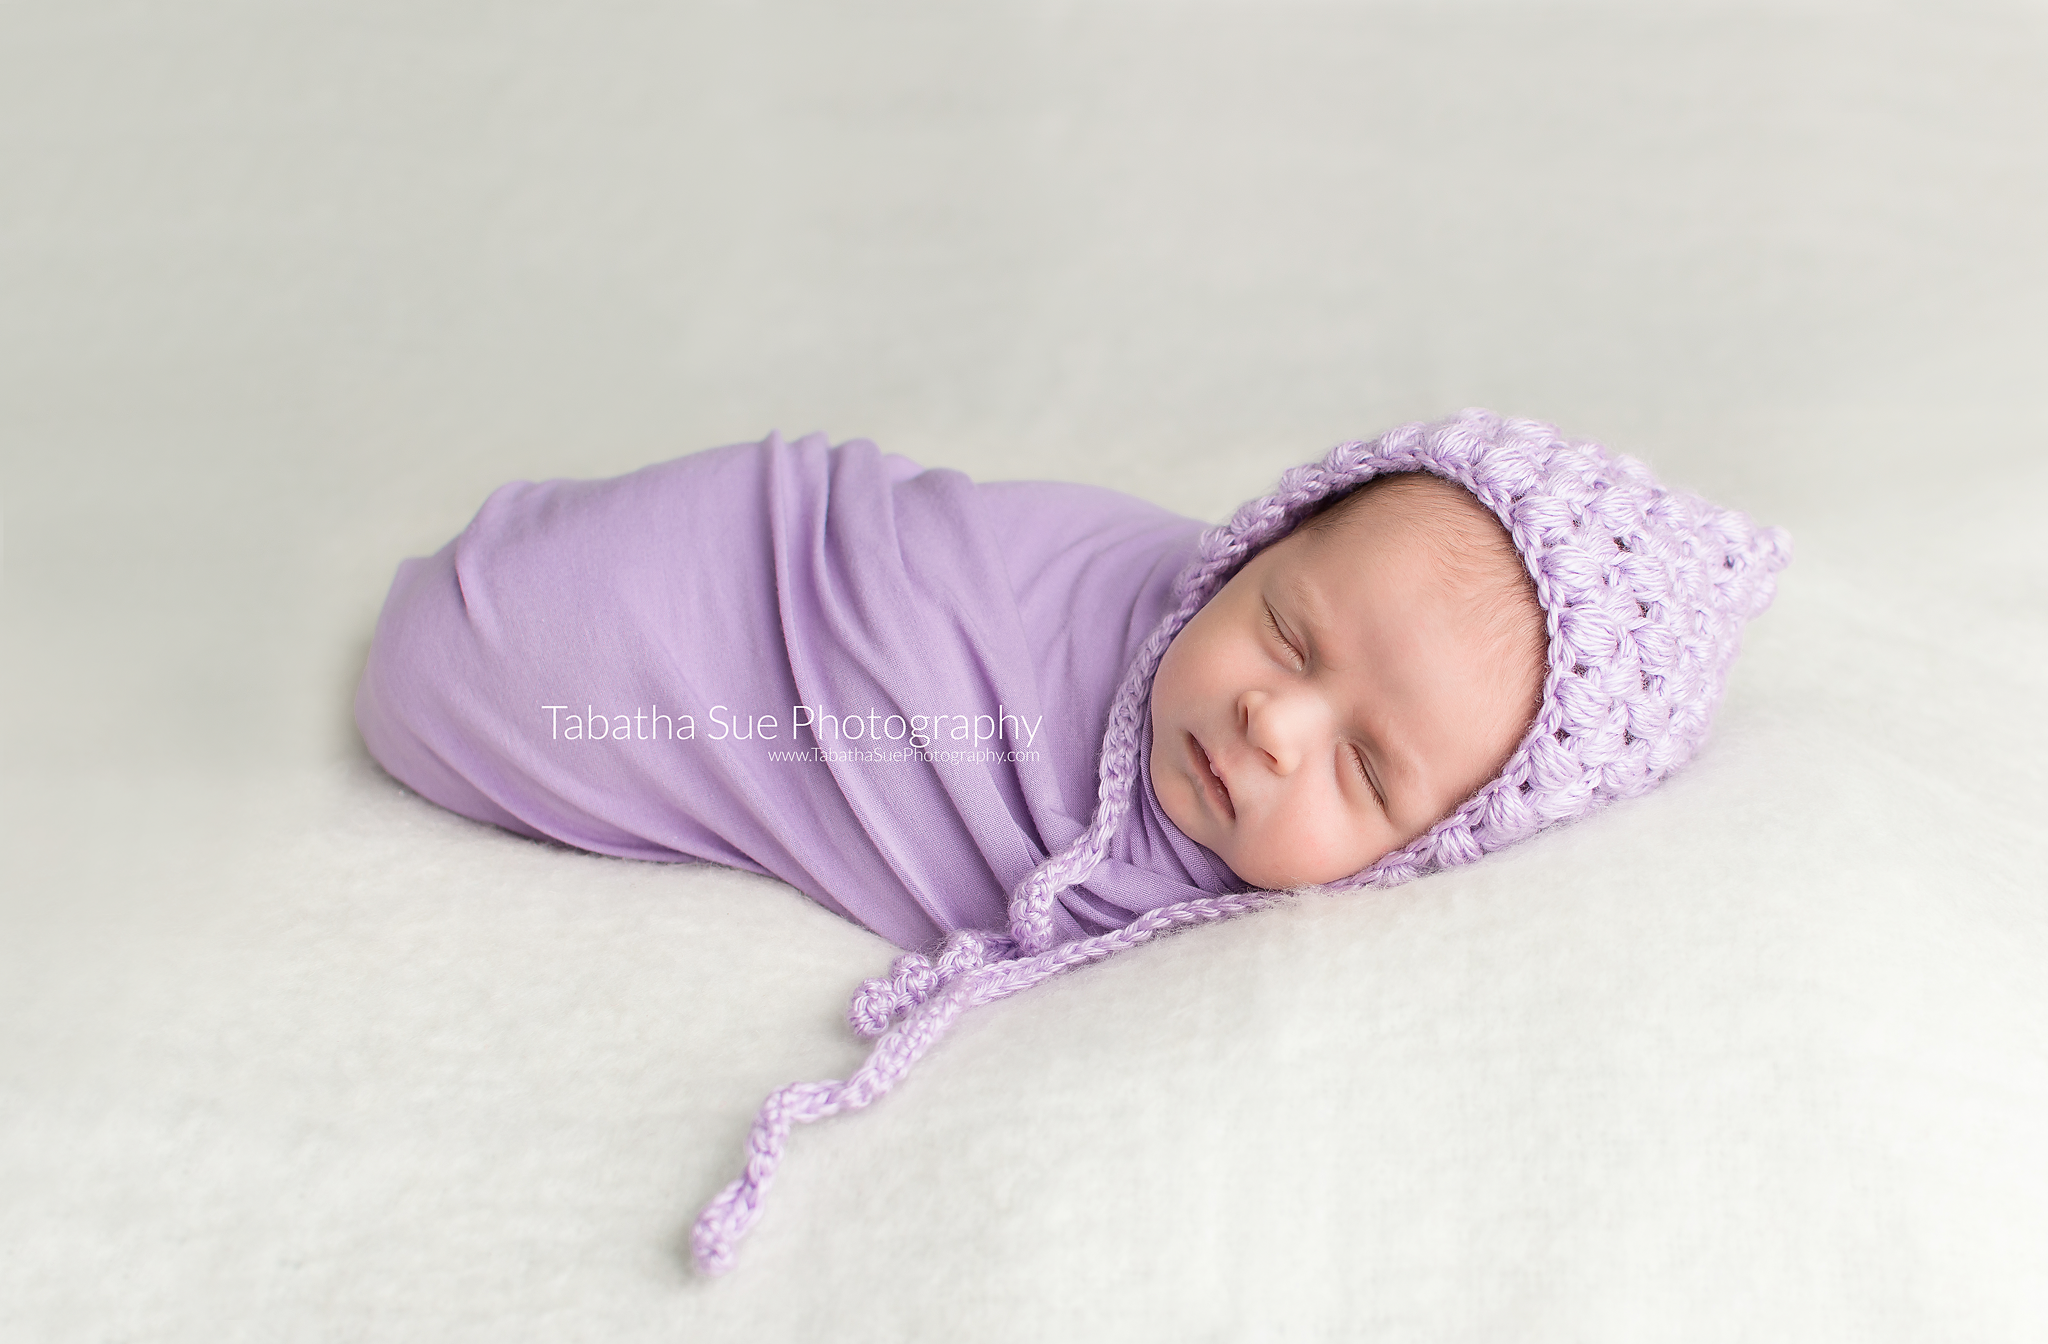 Top 5 items to pack for your newborn session